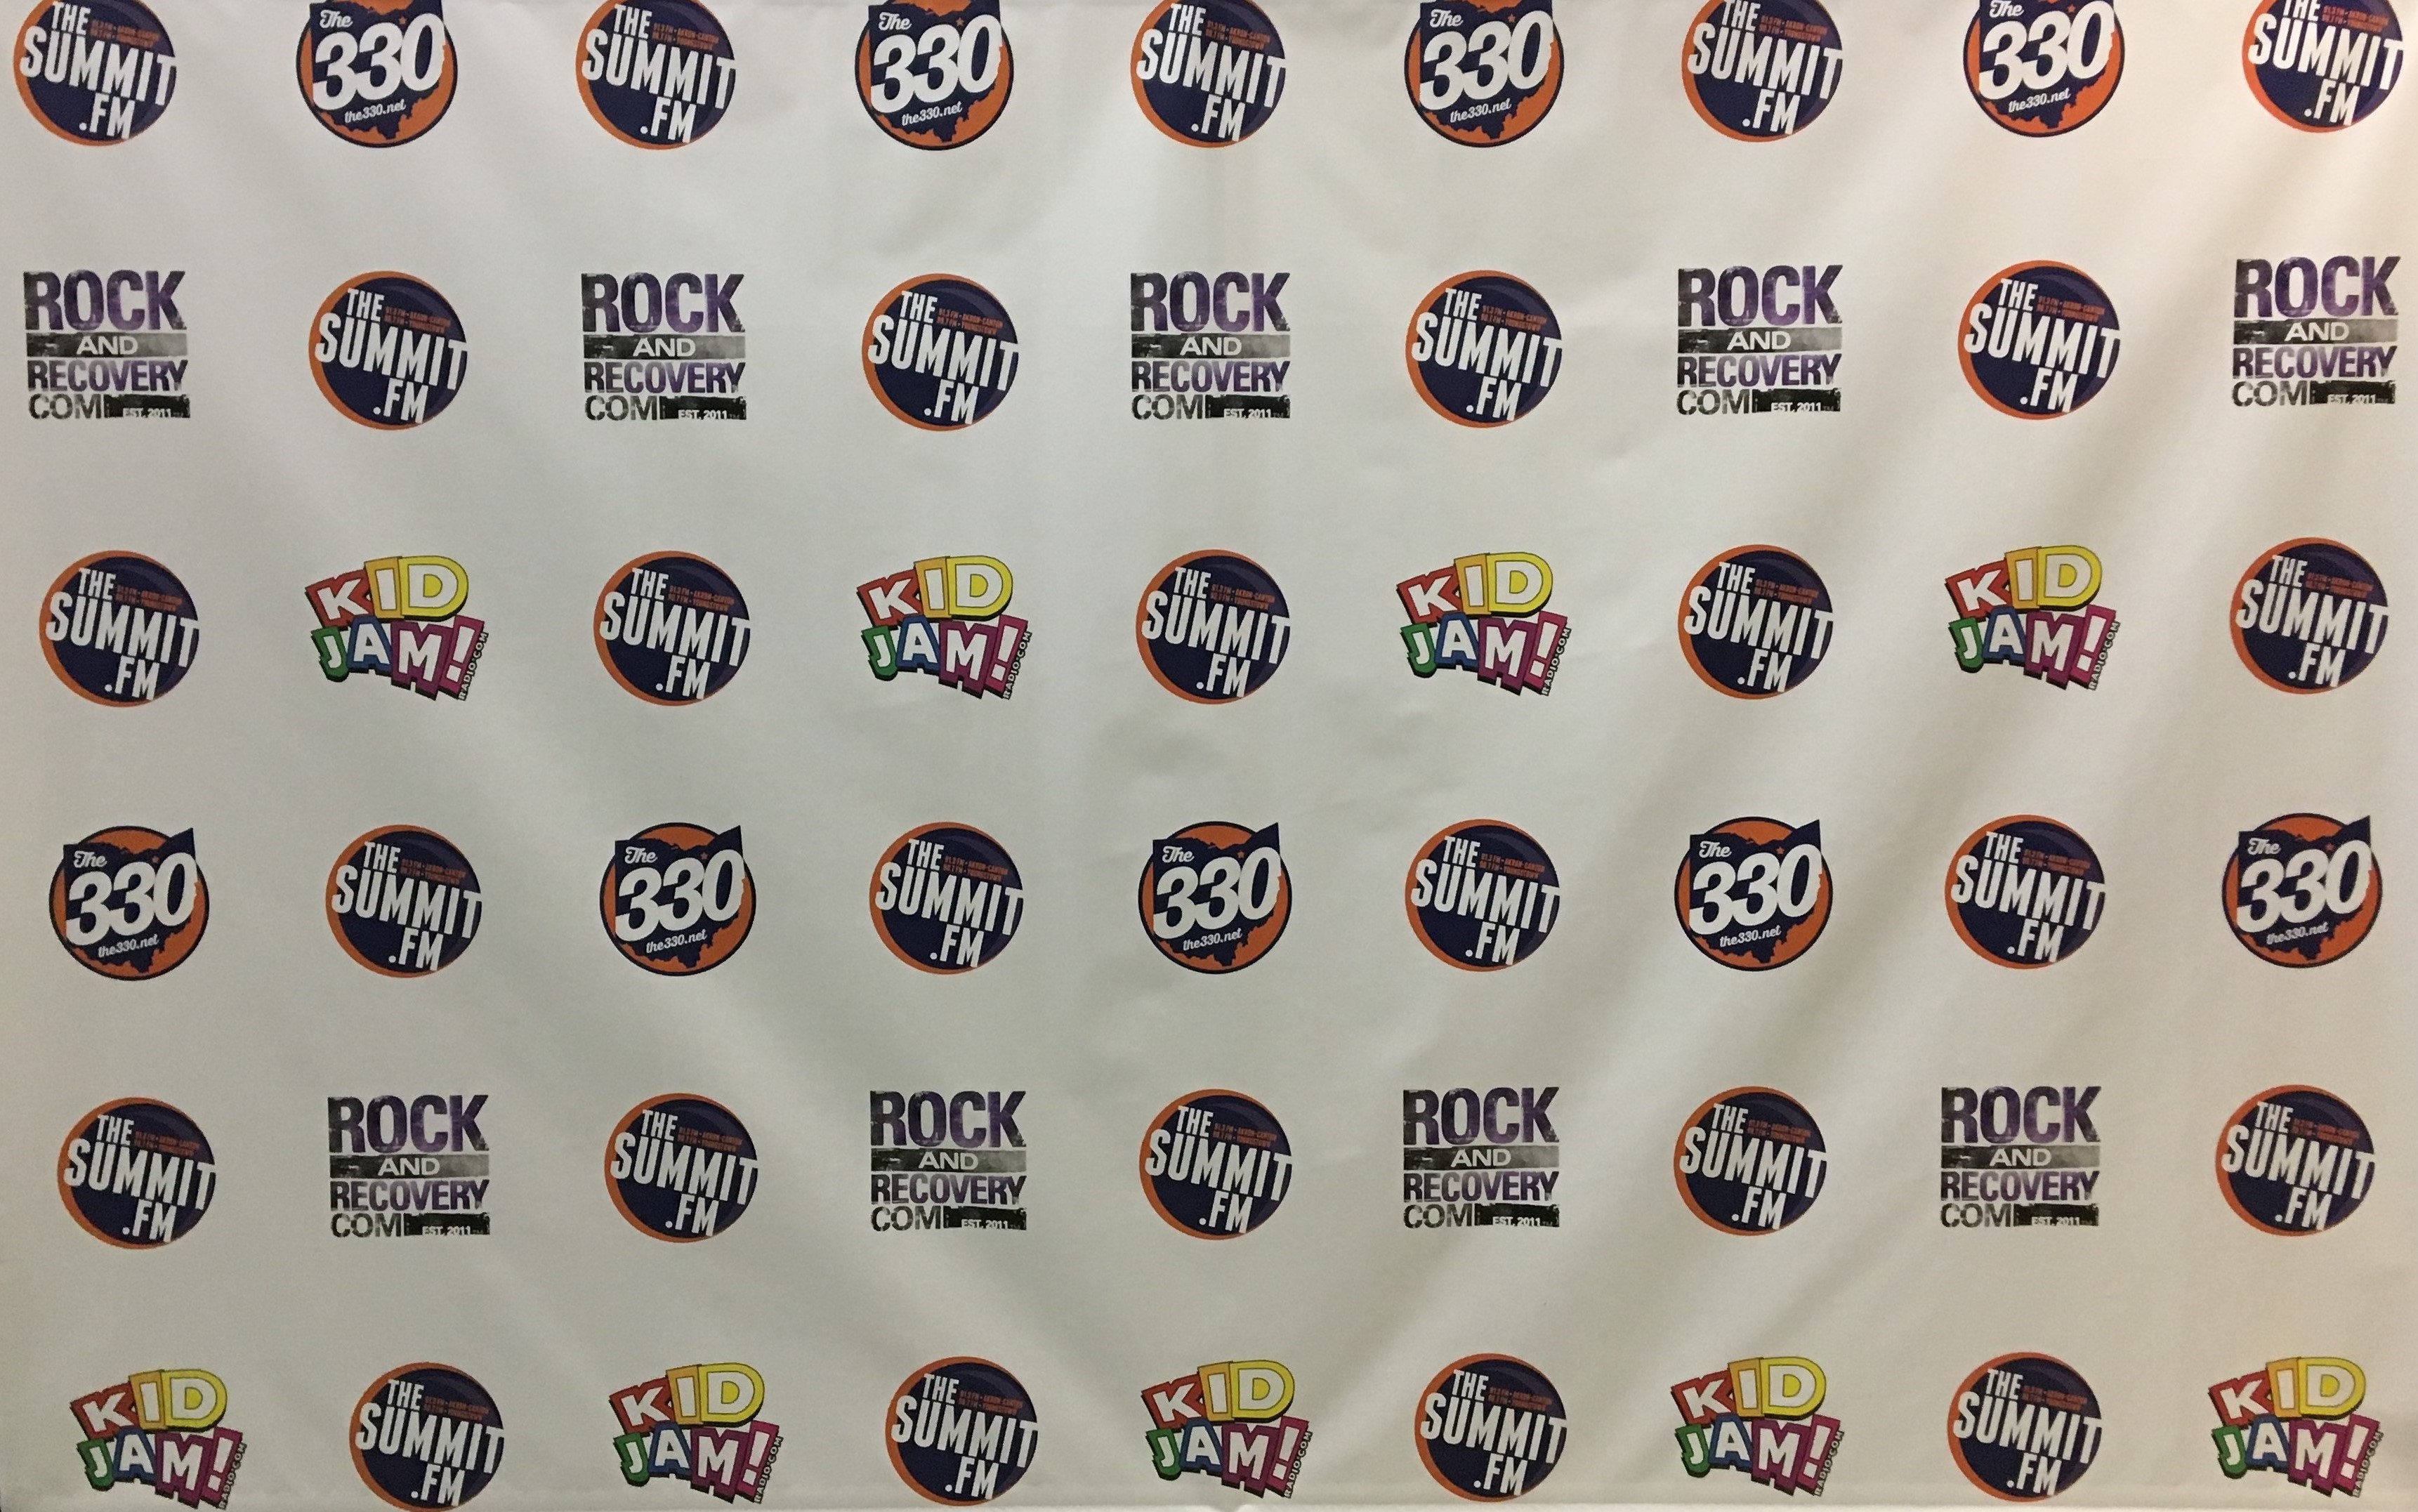 Summit.fm step and repeat banner akron